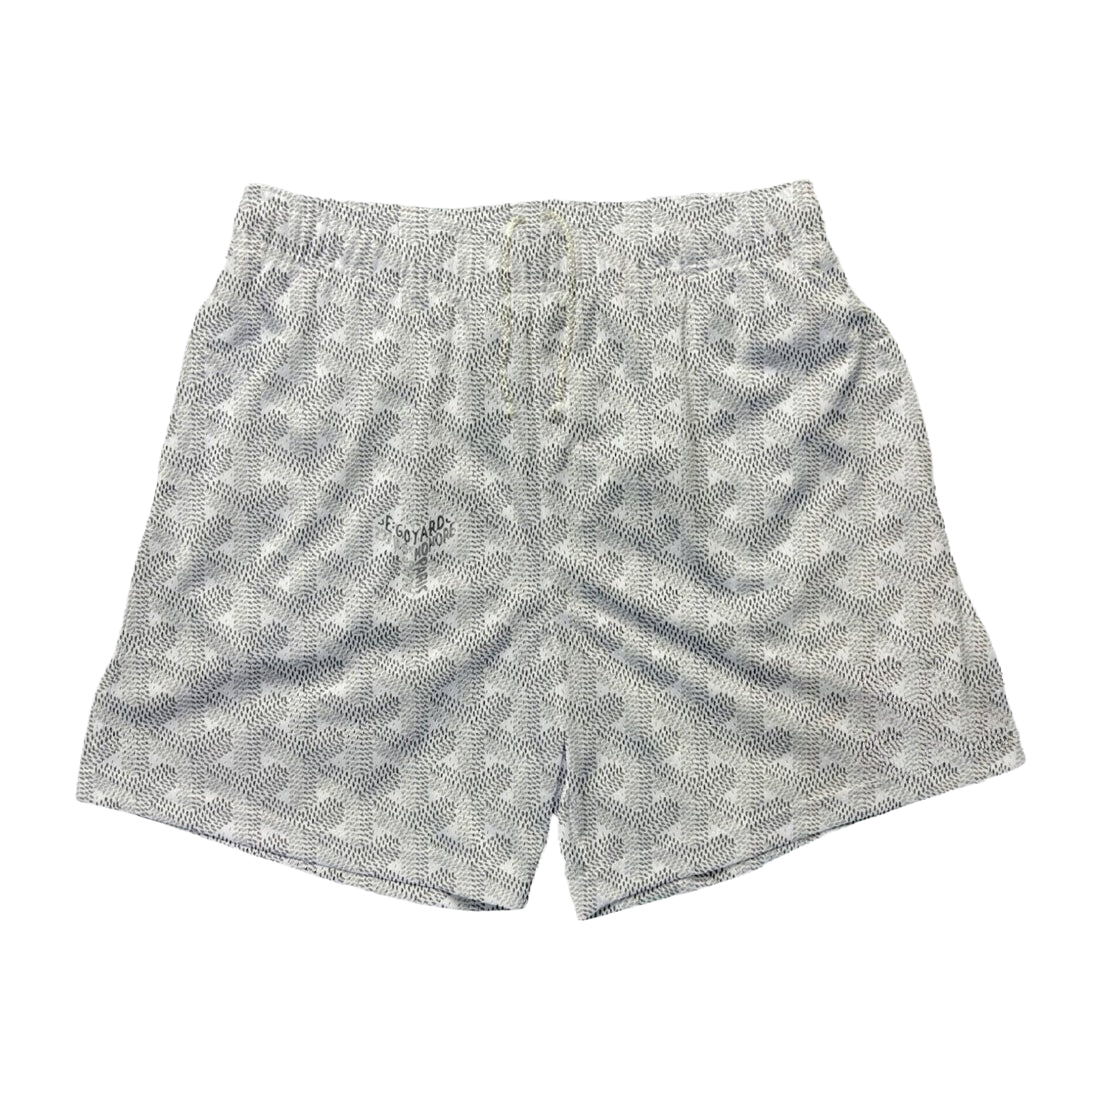 a white shorts with a black and white pattern